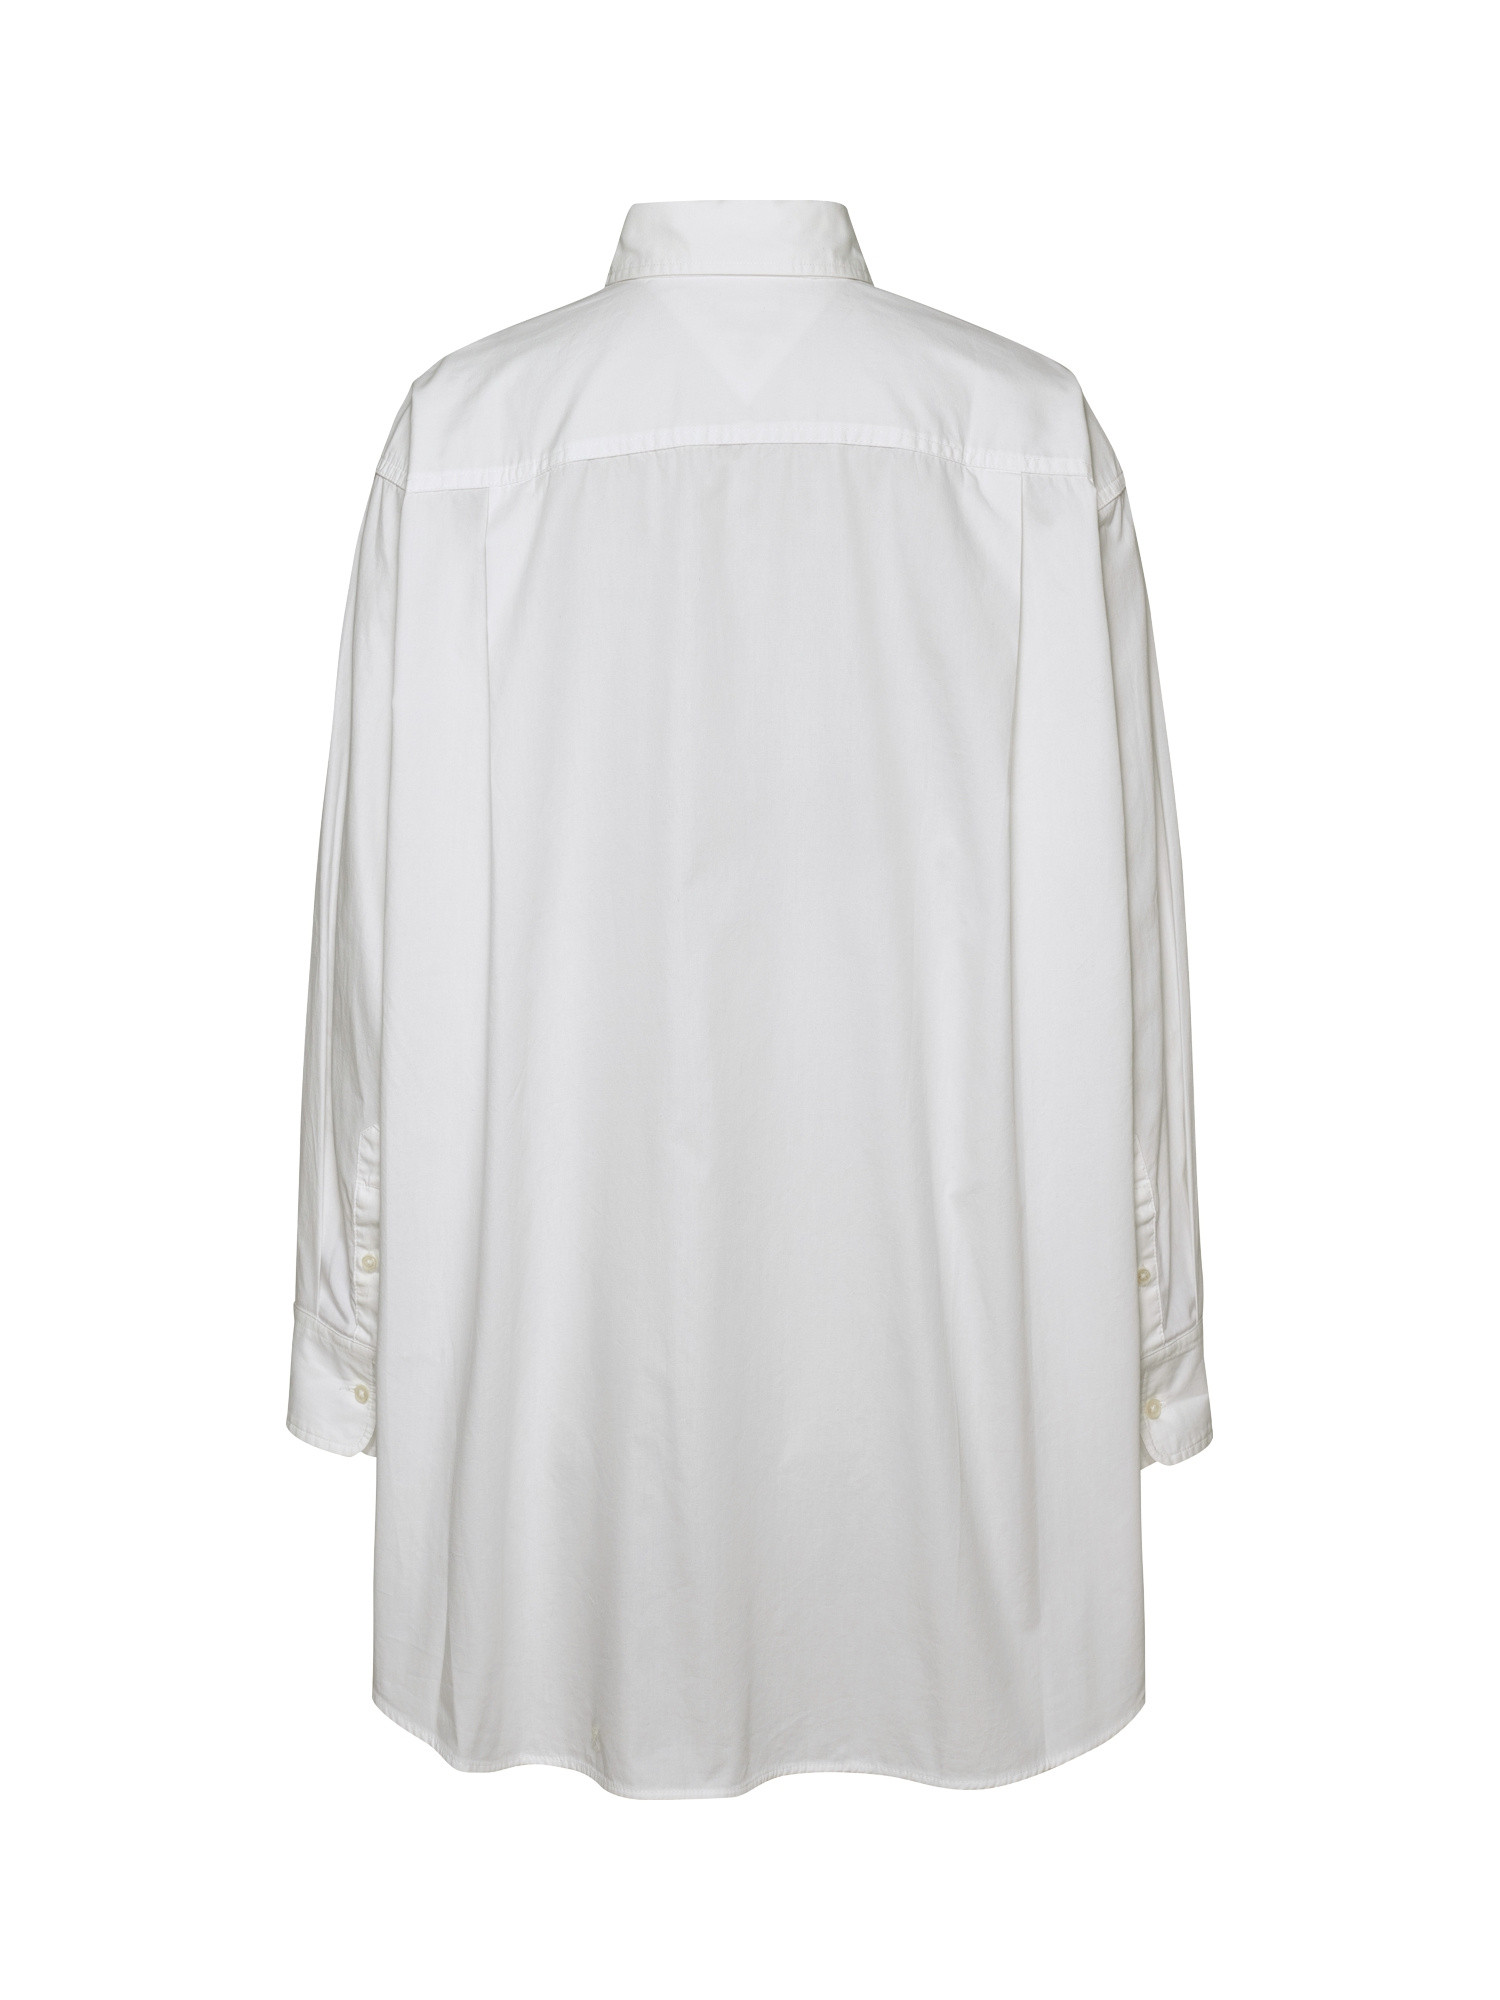 Tommy Jeans - Camicia oversize con logo in cotone, Bianco, large image number 1